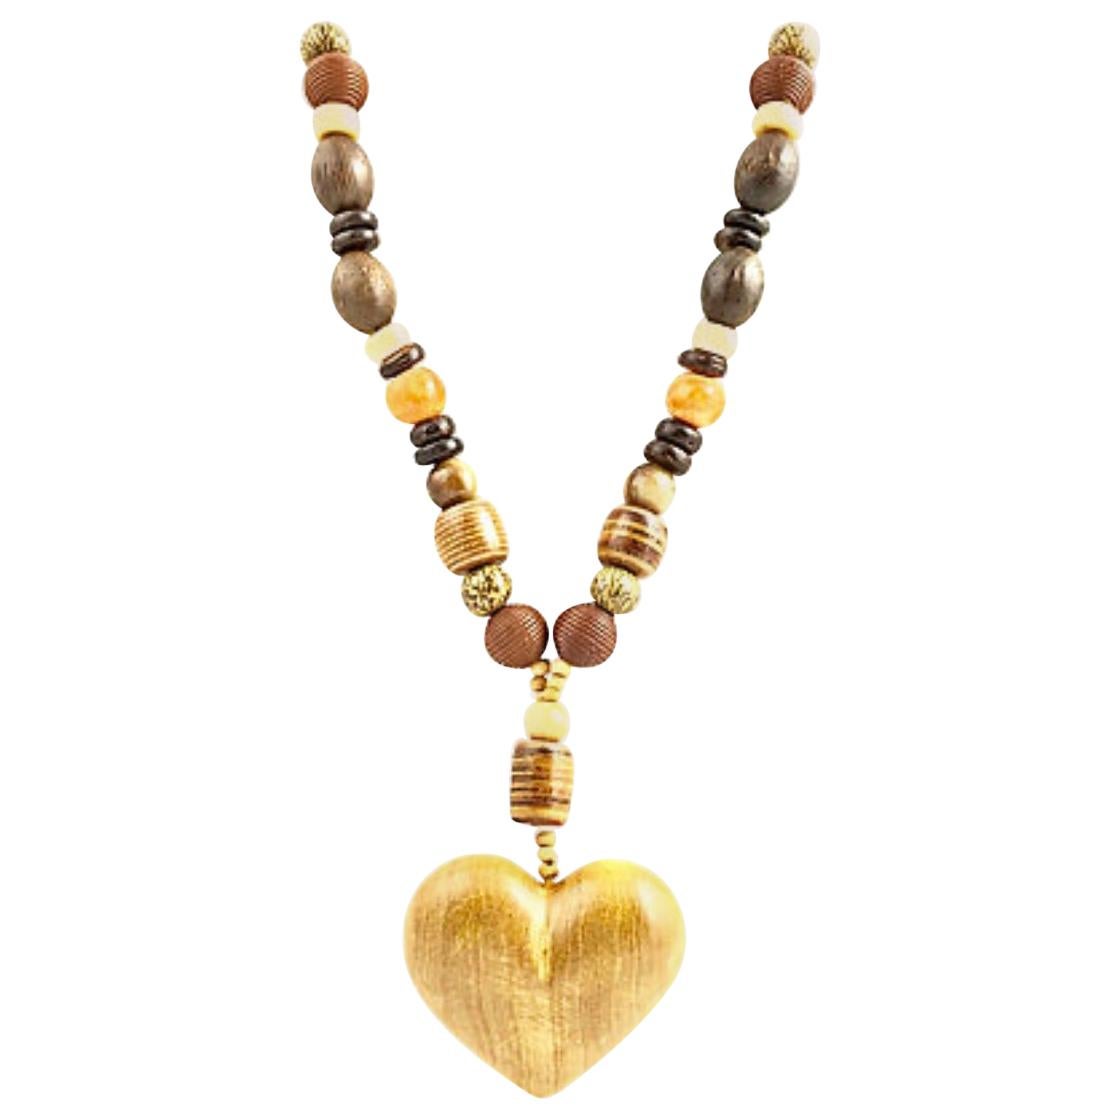 Stone and Wood Heart Bead Necklace by Fabrice Paris